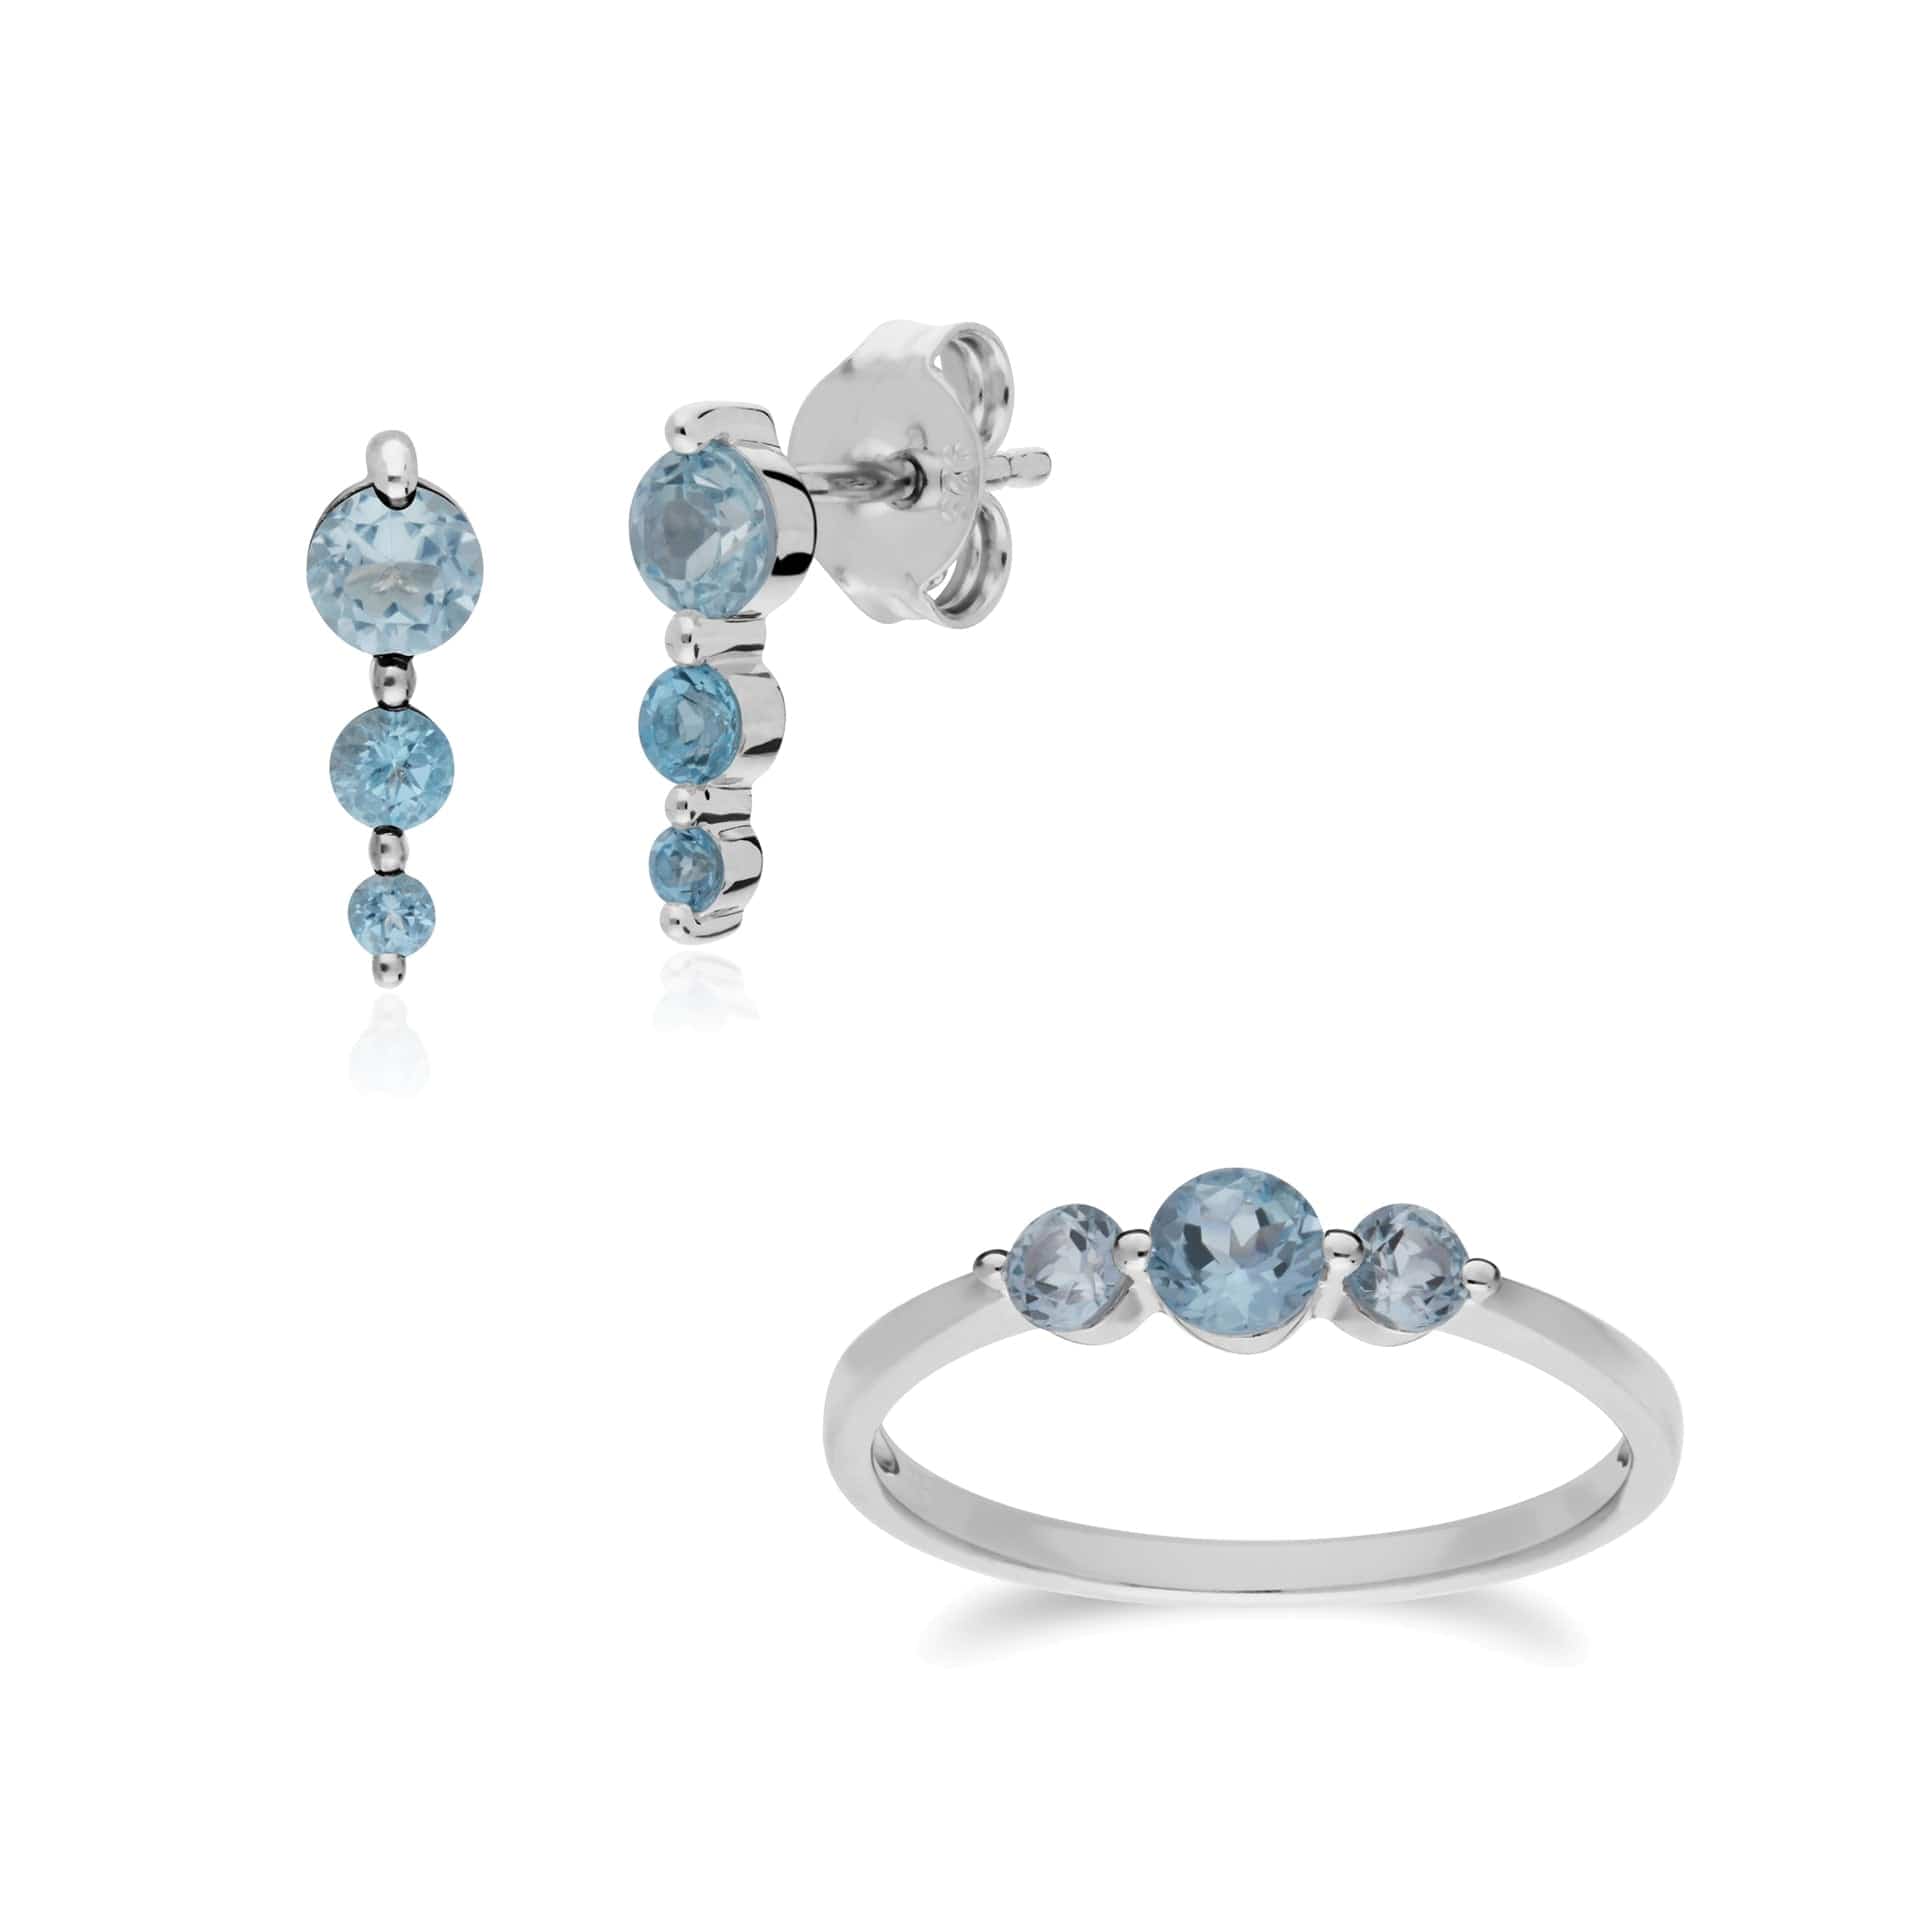 270E025501925-270R056001925 Classic Round Blue Topaz Three Stone Gradient Earrings & Ring Set in 925 Sterling Silver 1